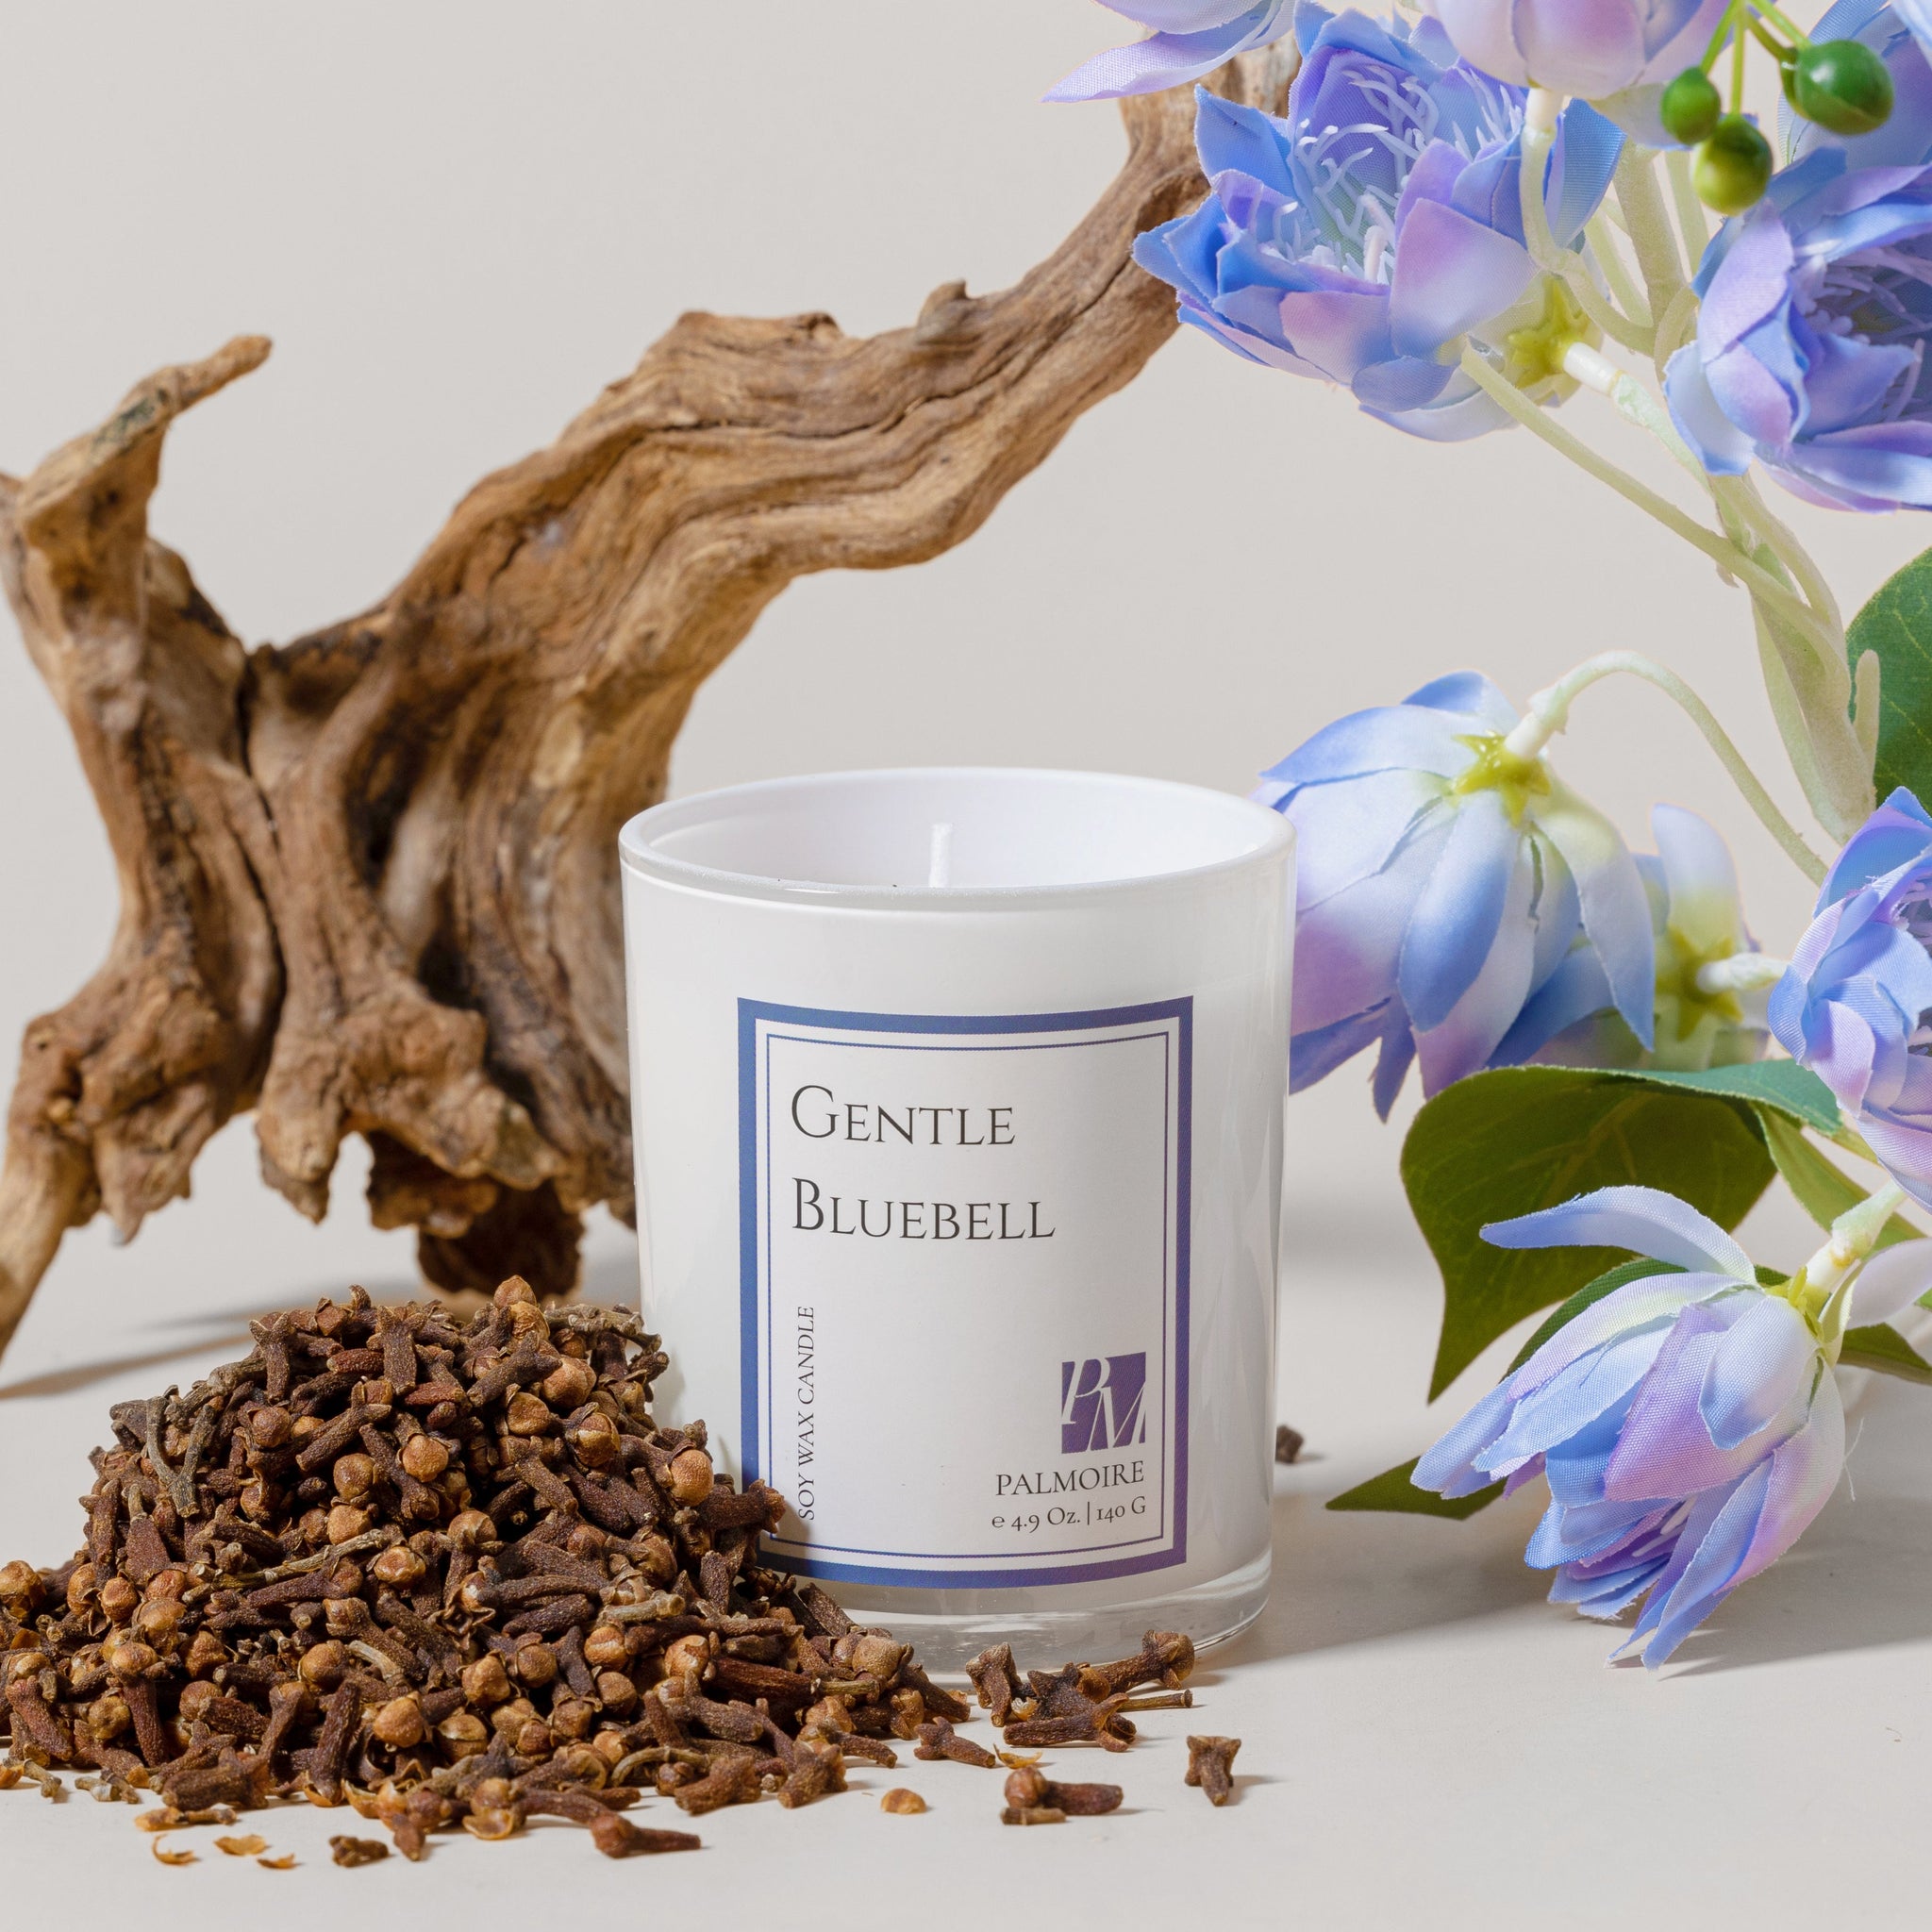 Gentle Bluebell Soy Wax Candle